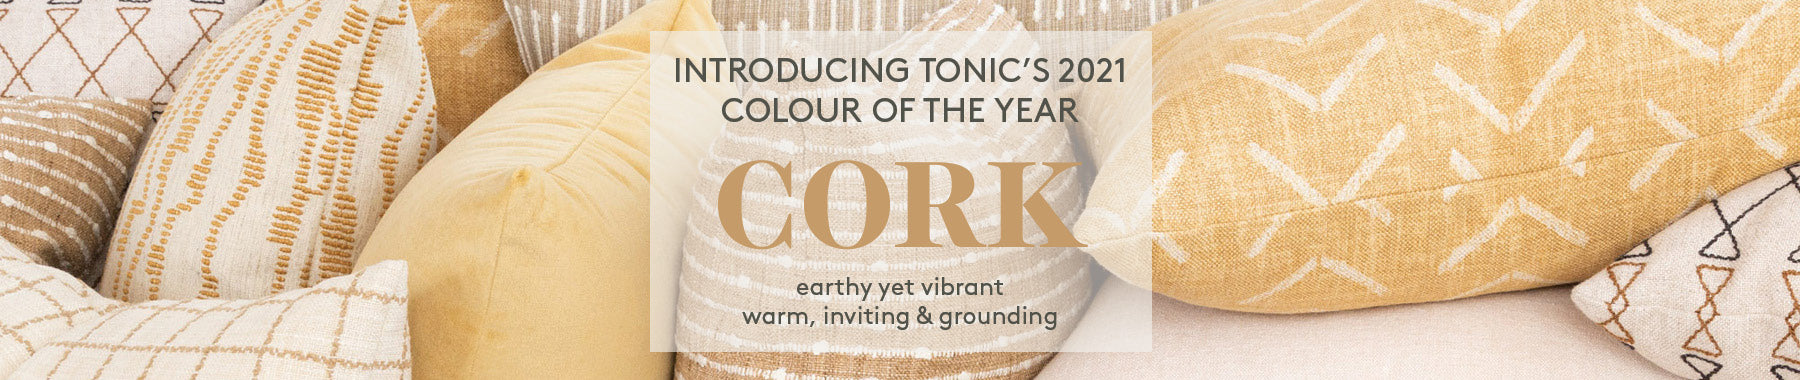 2021 Colour of the Year: Cork